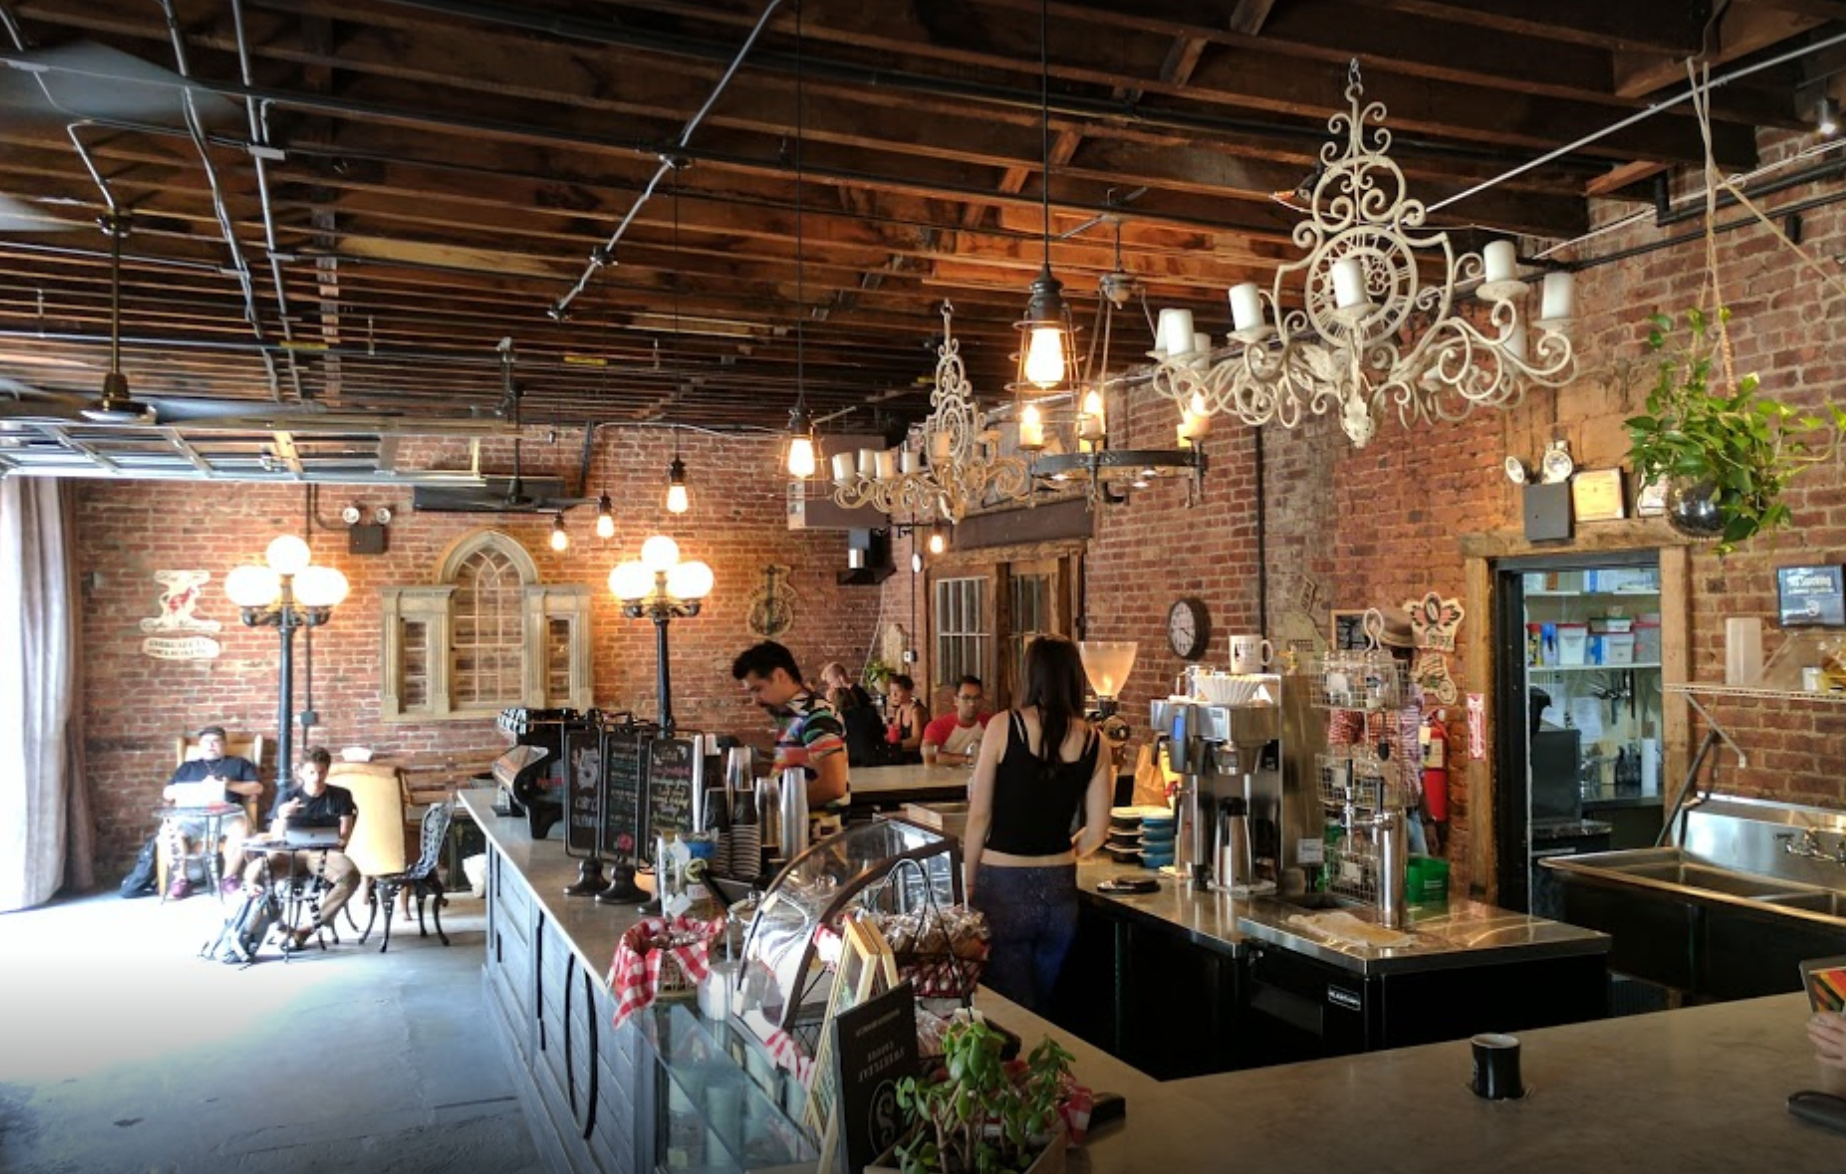 The Best Cafes To Work From In New York | by Mike Slaats | Workmappy